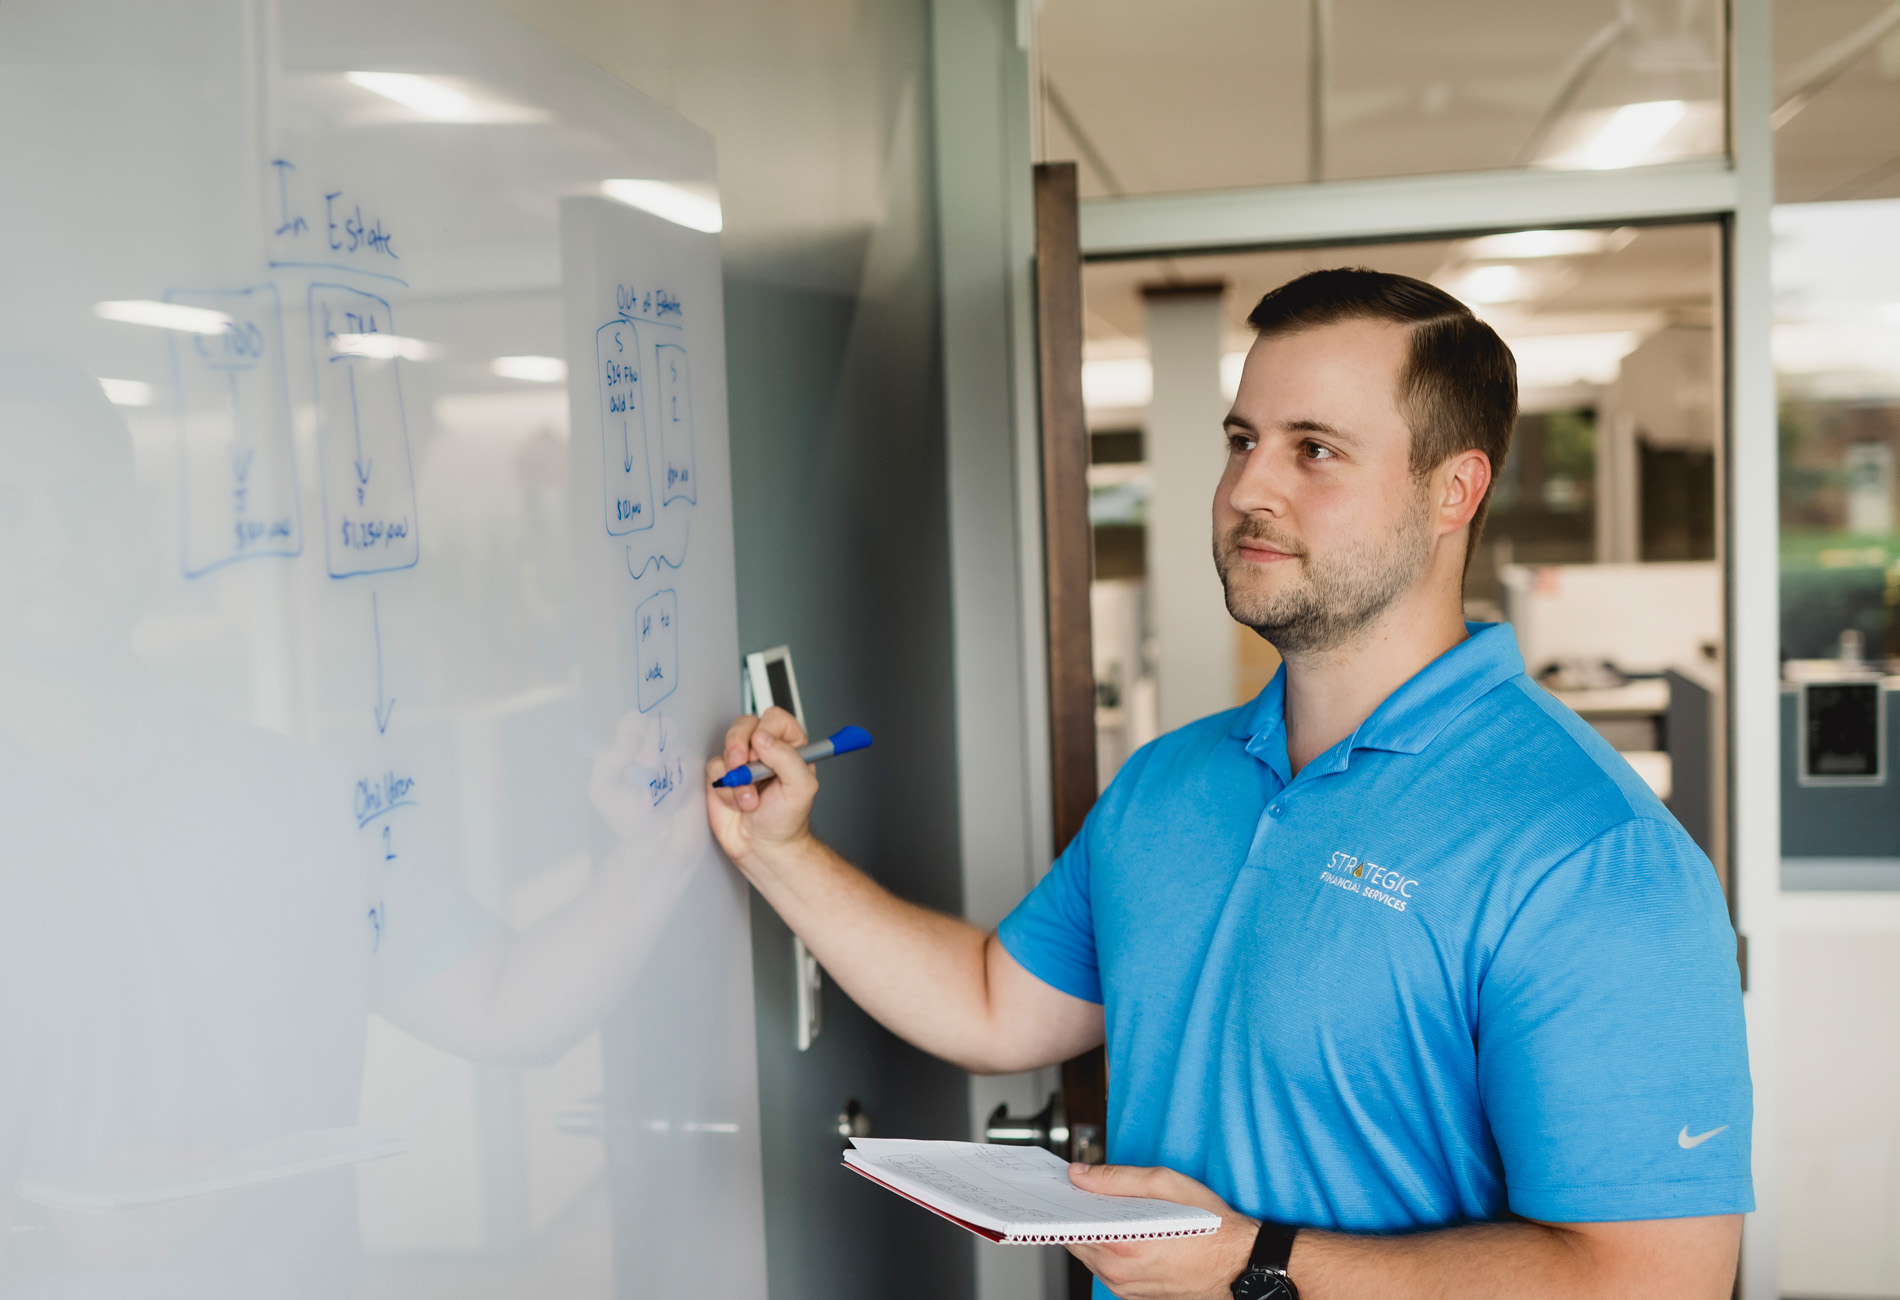 Justin Hearty, CFP, Financial Planning Specialist: A man with short brown hair wearing a blue golf polo and writing on a whiteboard.